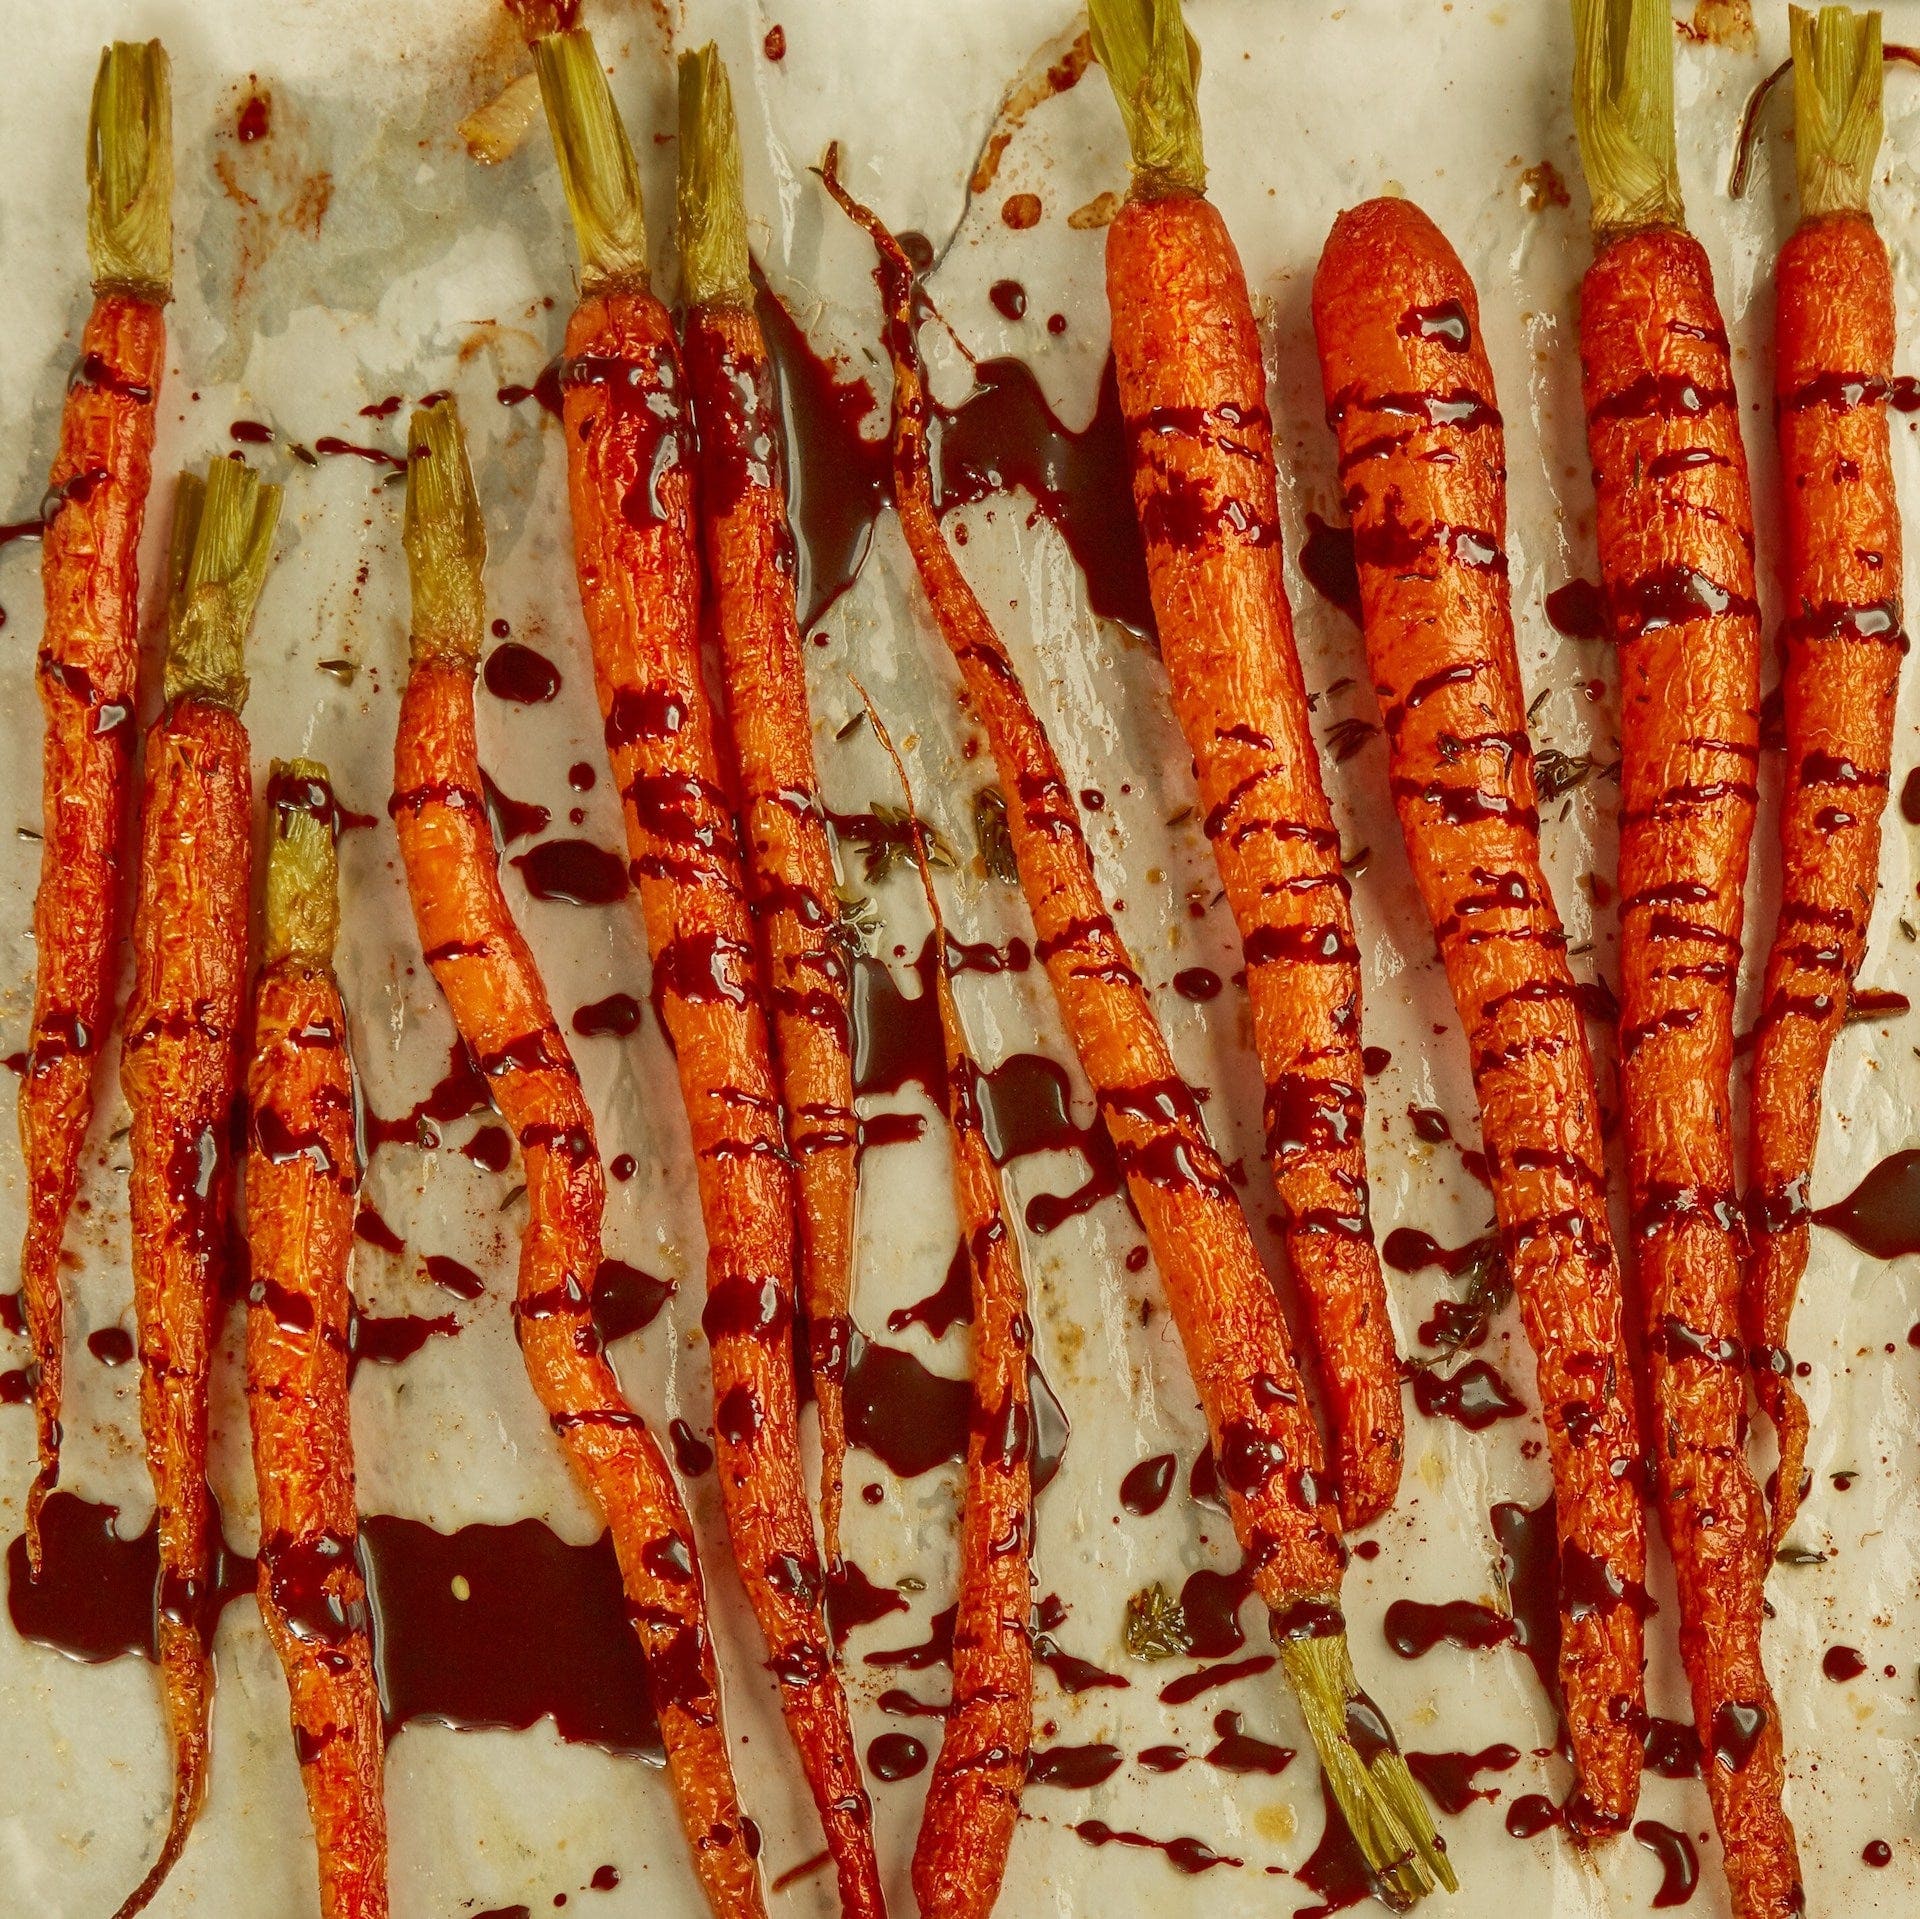 Roasted Carrots with Chocolate Balsamic Reduction